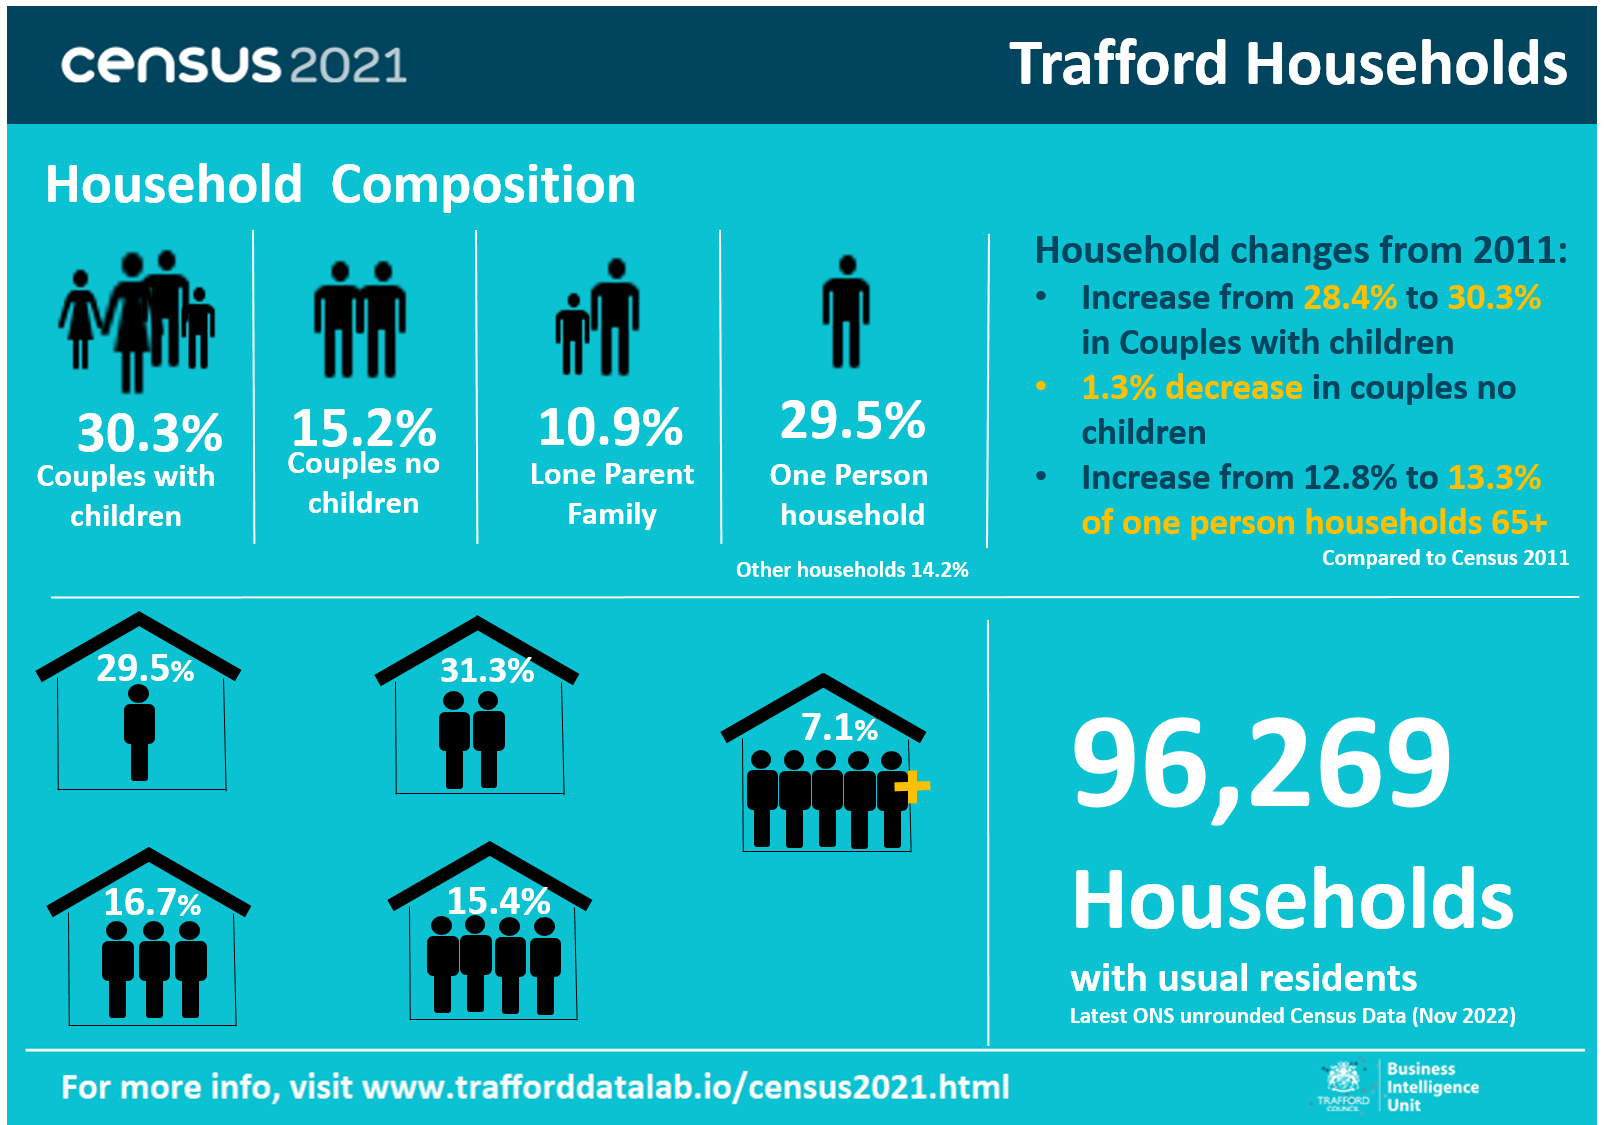 Infographic showing the composition of Trafford households from census 2021 data.